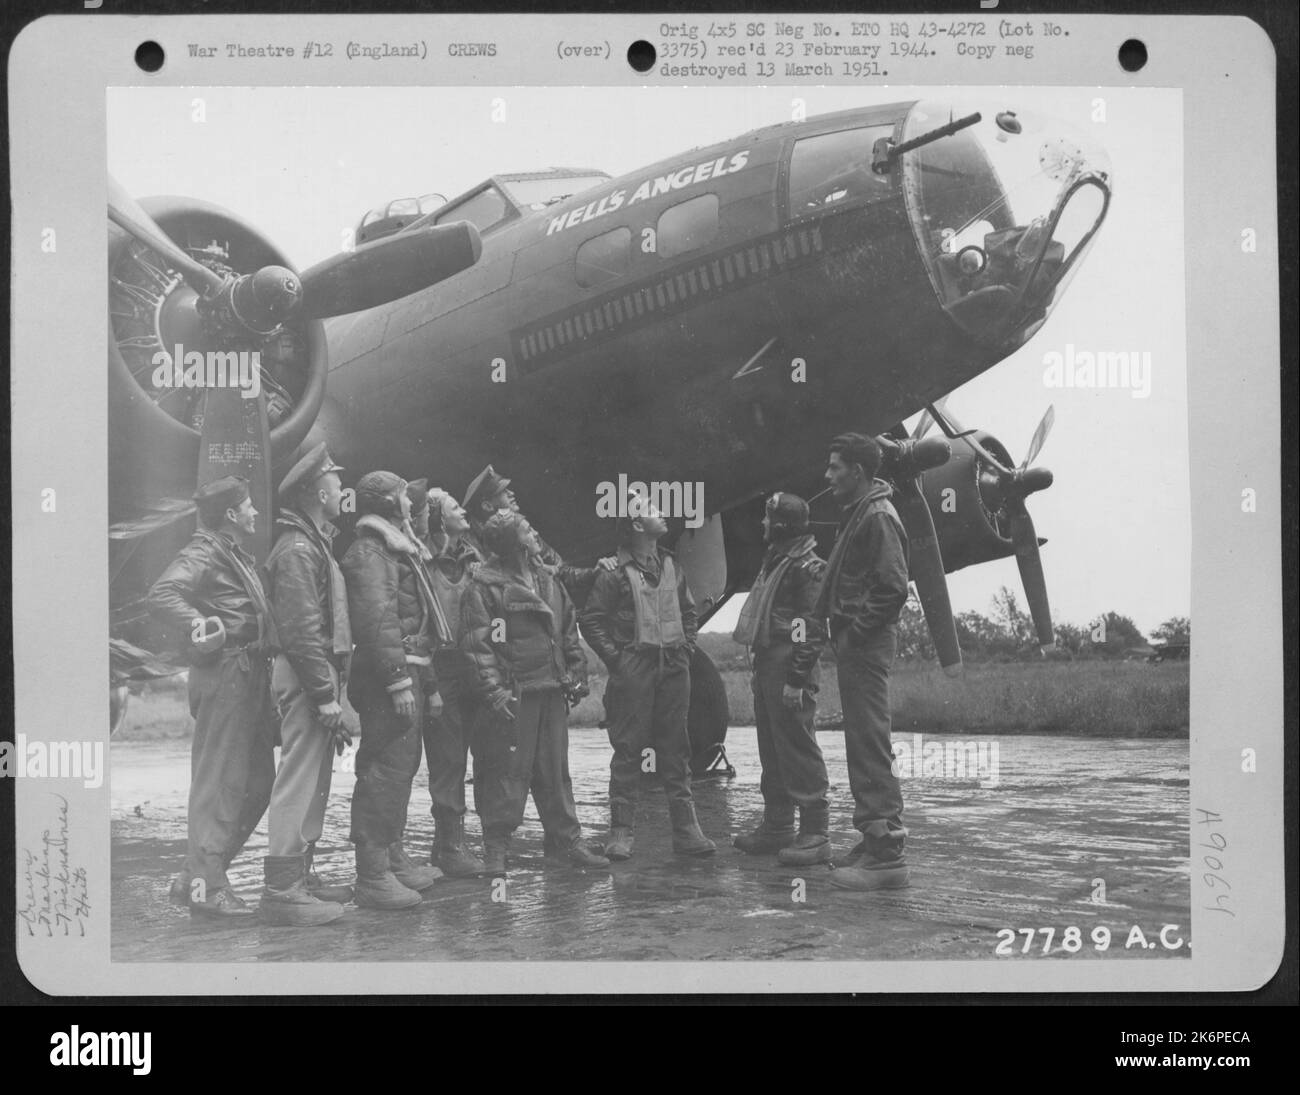 The crew of the Boeing B-17 'HELLS ANGELS' of the 303rd Bomb Group looks on with justifiable pride on the growing row of bombs on the plane, after returning from their 28th mission over enemy territory. England, 15 June 1943. Stock Photo